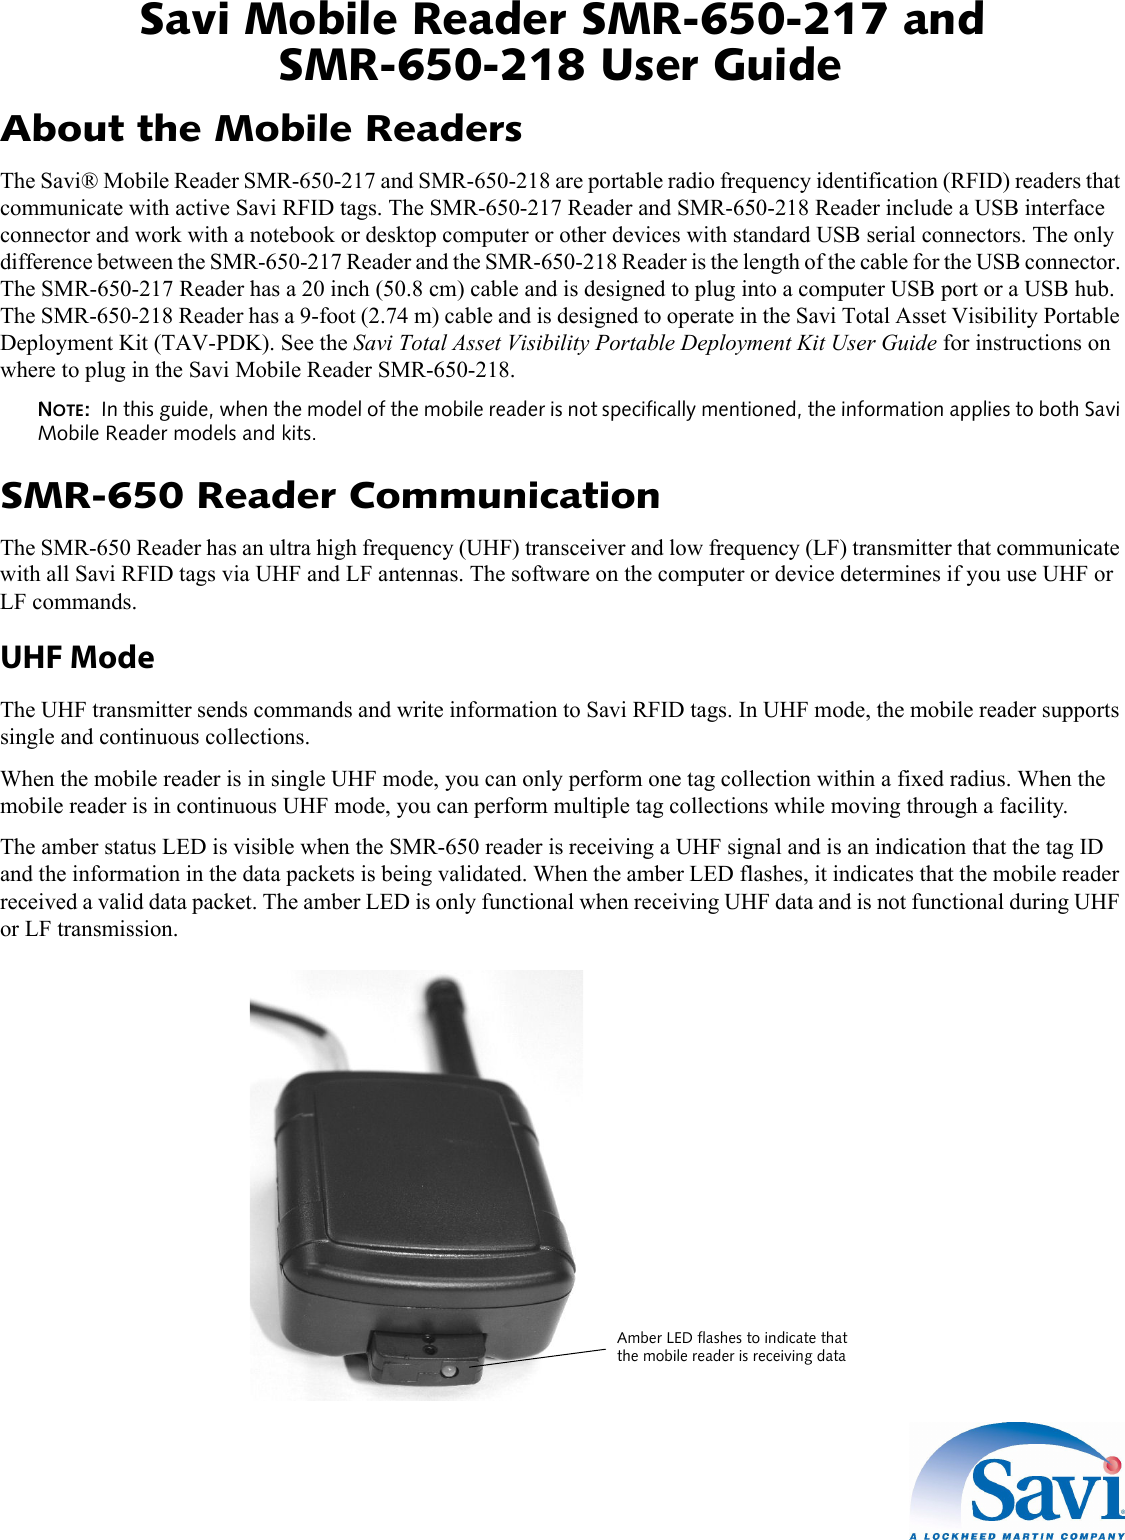 Savi Mobile Reader SMR-650-217 and SMR-650-218 User Guide 1  About the Mobile ReadersThe Savi® Mobile Reader SMR-650-217 and SMR-650-218 are portable radio frequency identification (RFID) readers that communicate with active Savi RFID tags. The SMR-650-217 Reader and SMR-650-218 Reader include a USB interface connector and work with a notebook or desktop computer or other devices with standard USB serial connectors. The only difference between the SMR-650-217 Reader and the SMR-650-218 Reader is the length of the cable for the USB connector. The SMR-650-217 Reader has a 20 inch (50.8 cm) cable and is designed to plug into a computer USB port or a USB hub. The SMR-650-218 Reader has a 9-foot (2.74 m) cable and is designed to operate in the Savi Total Asset Visibility Portable Deployment Kit (TAV-PDK). See the Savi Total Asset Visibility Portable Deployment Kit User Guide for instructions on where to plug in the Savi Mobile Reader SMR-650-218.NOTE:  In this guide, when the model of the mobile reader is not specifically mentioned, the information applies to both Savi Mobile Reader models and kits.SMR-650 Reader CommunicationThe SMR-650 Reader has an ultra high frequency (UHF) transceiver and low frequency (LF) transmitter that communicate with all Savi RFID tags via UHF and LF antennas. The software on the computer or device determines if you use UHF or LF commands.UHF ModeThe UHF transmitter sends commands and write information to Savi RFID tags. In UHF mode, the mobile reader supports single and continuous collections.When the mobile reader is in single UHF mode, you can only perform one tag collection within a fixed radius. When the mobile reader is in continuous UHF mode, you can perform multiple tag collections while moving through a facility.The amber status LED is visible when the SMR-650 reader is receiving a UHF signal and is an indication that the tag ID and the information in the data packets is being validated. When the amber LED flashes, it indicates that the mobile reader received a valid data packet. The amber LED is only functional when receiving UHF data and is not functional during UHF or LF transmission.Amber LED flashes to indicate thatthe mobile reader is receiving data